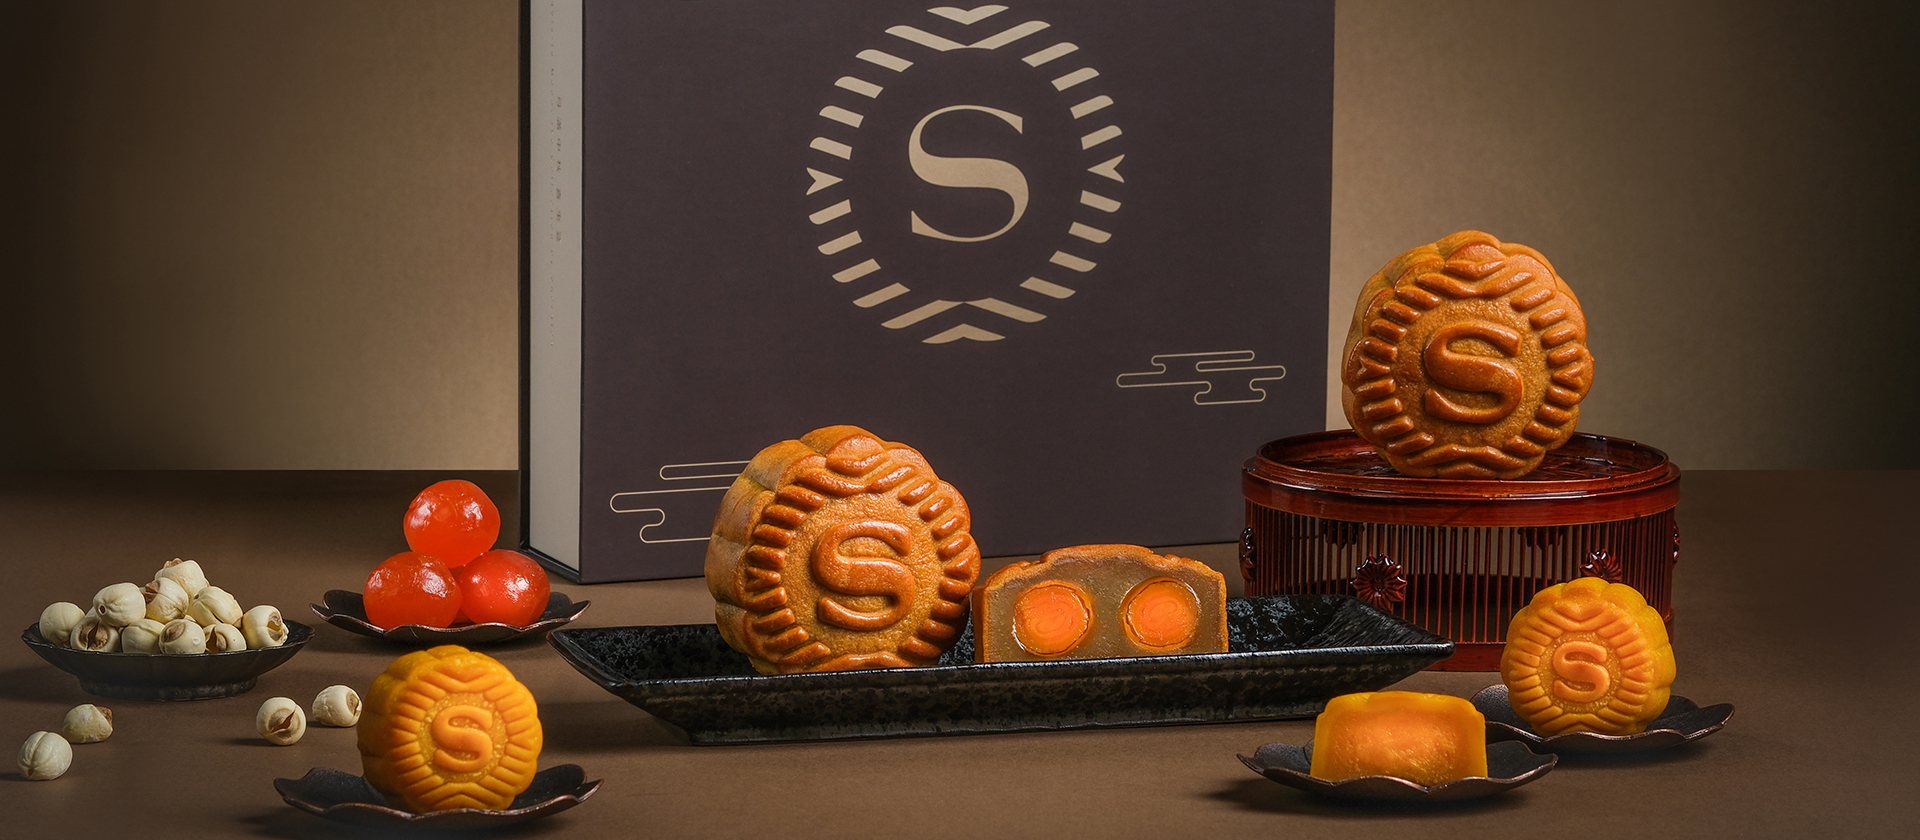 The Exquisite Mooncake Collection by Sheraton Hong Kong<br>
Up to 35% Early Bird Discount